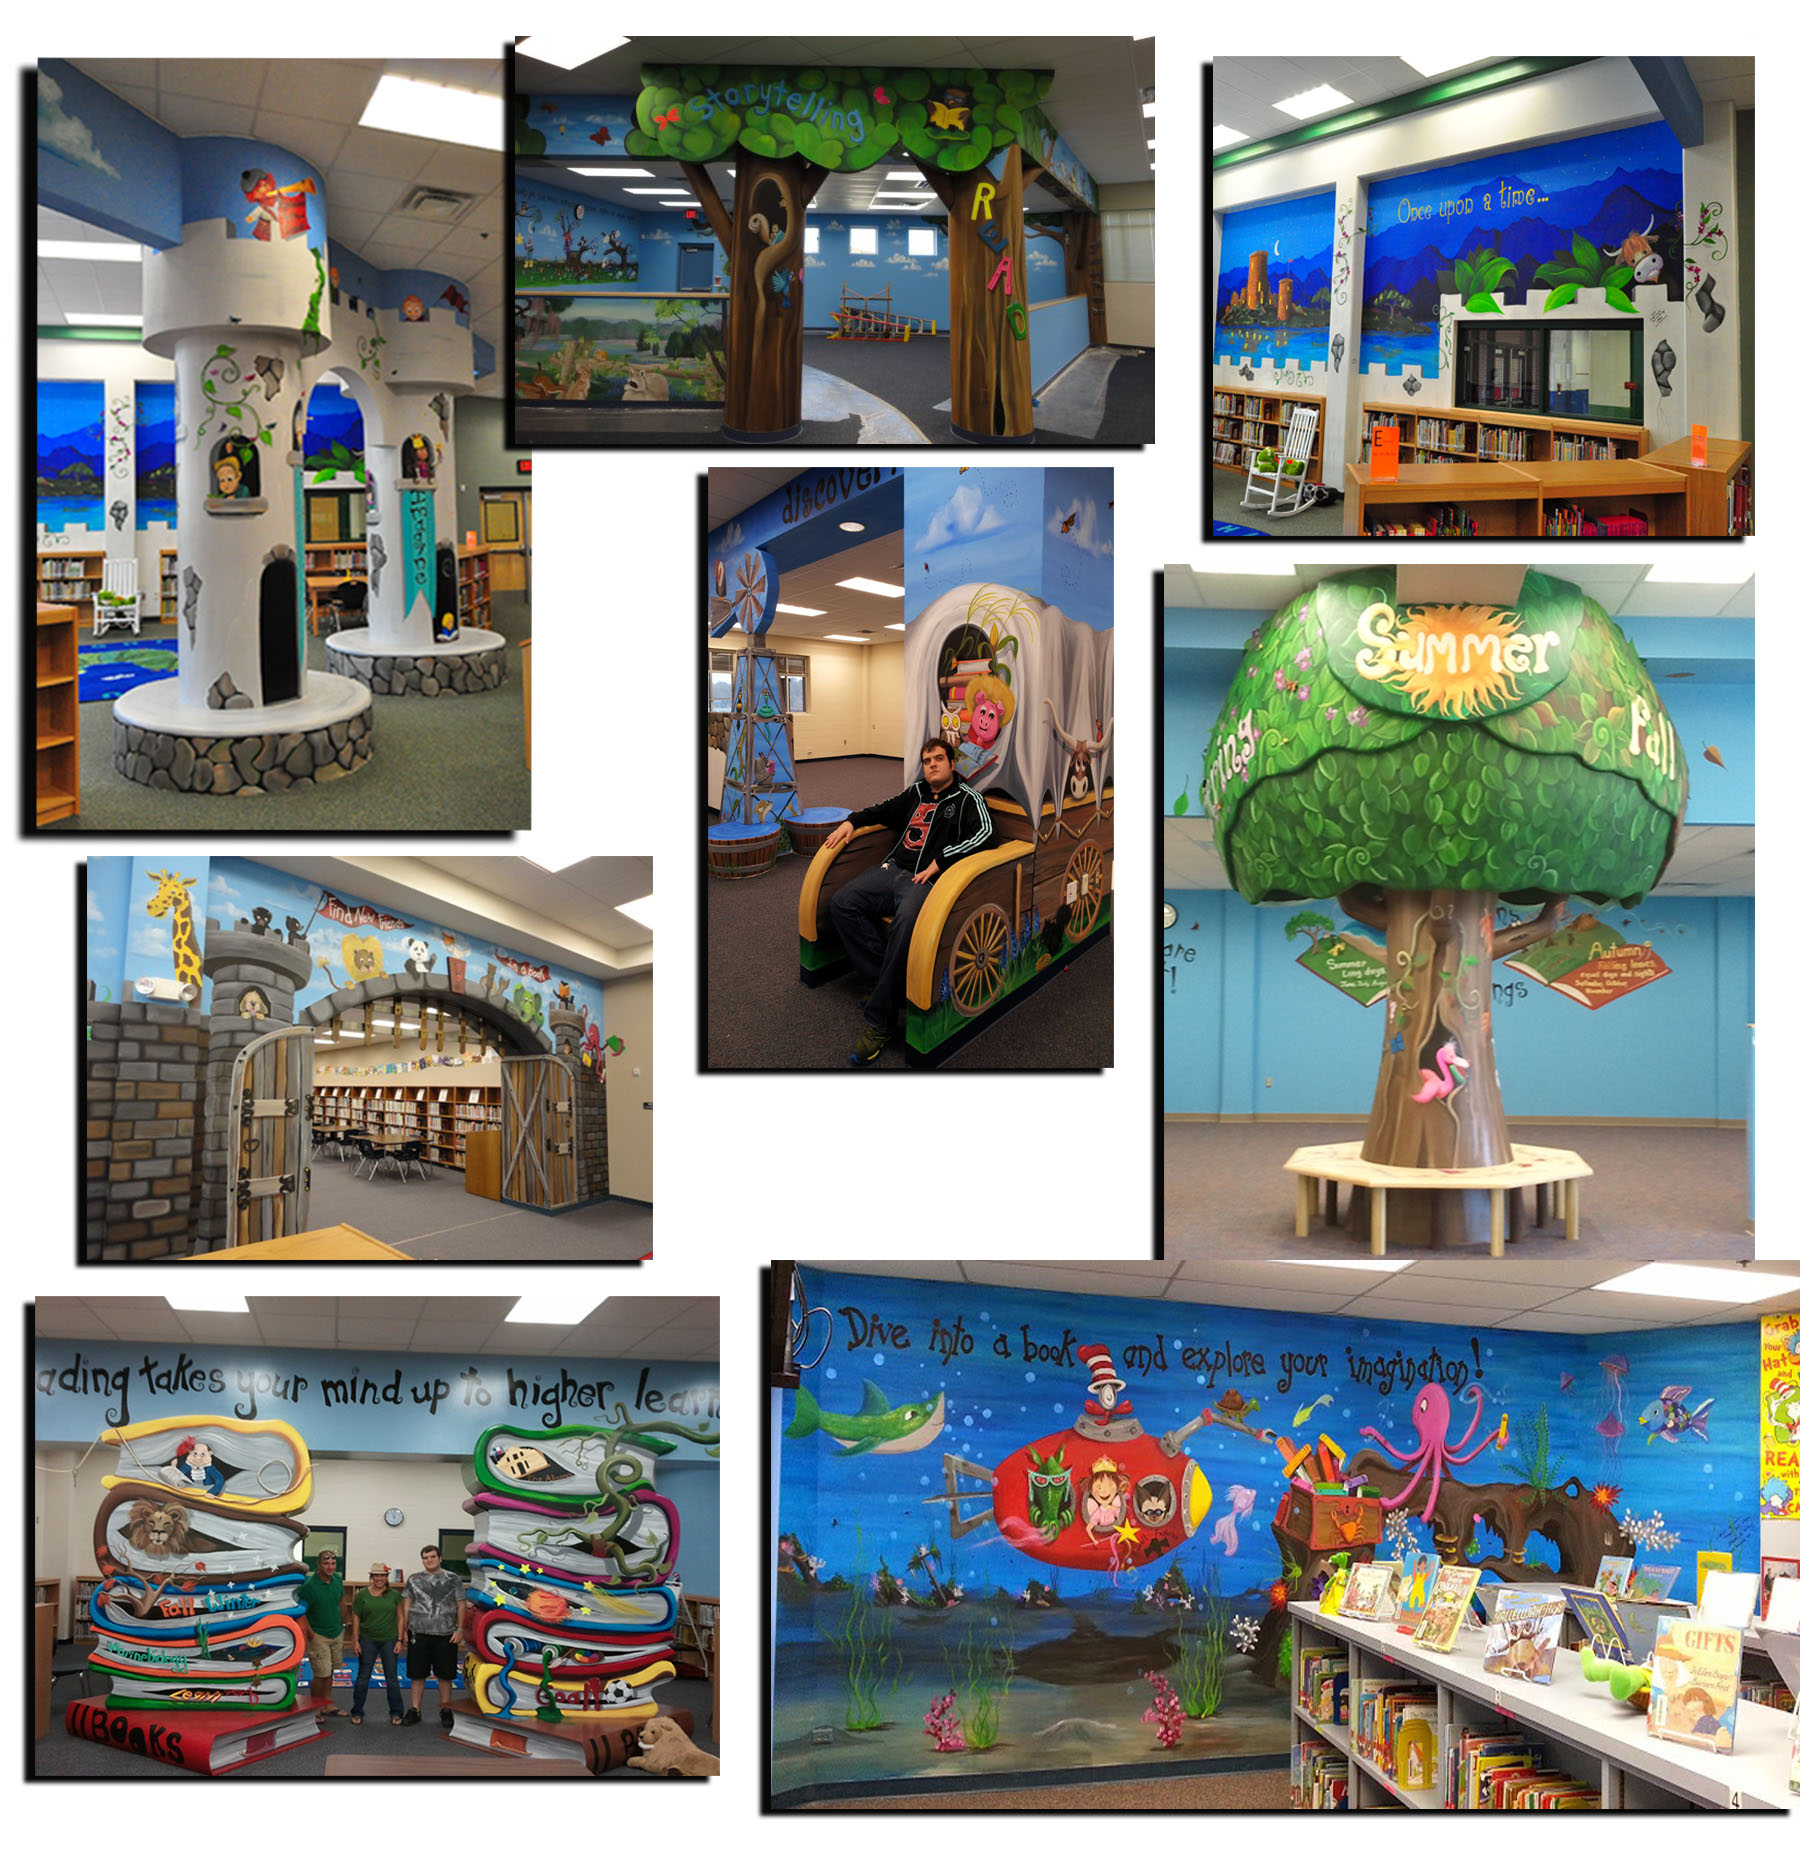 Educational and Instructional murals